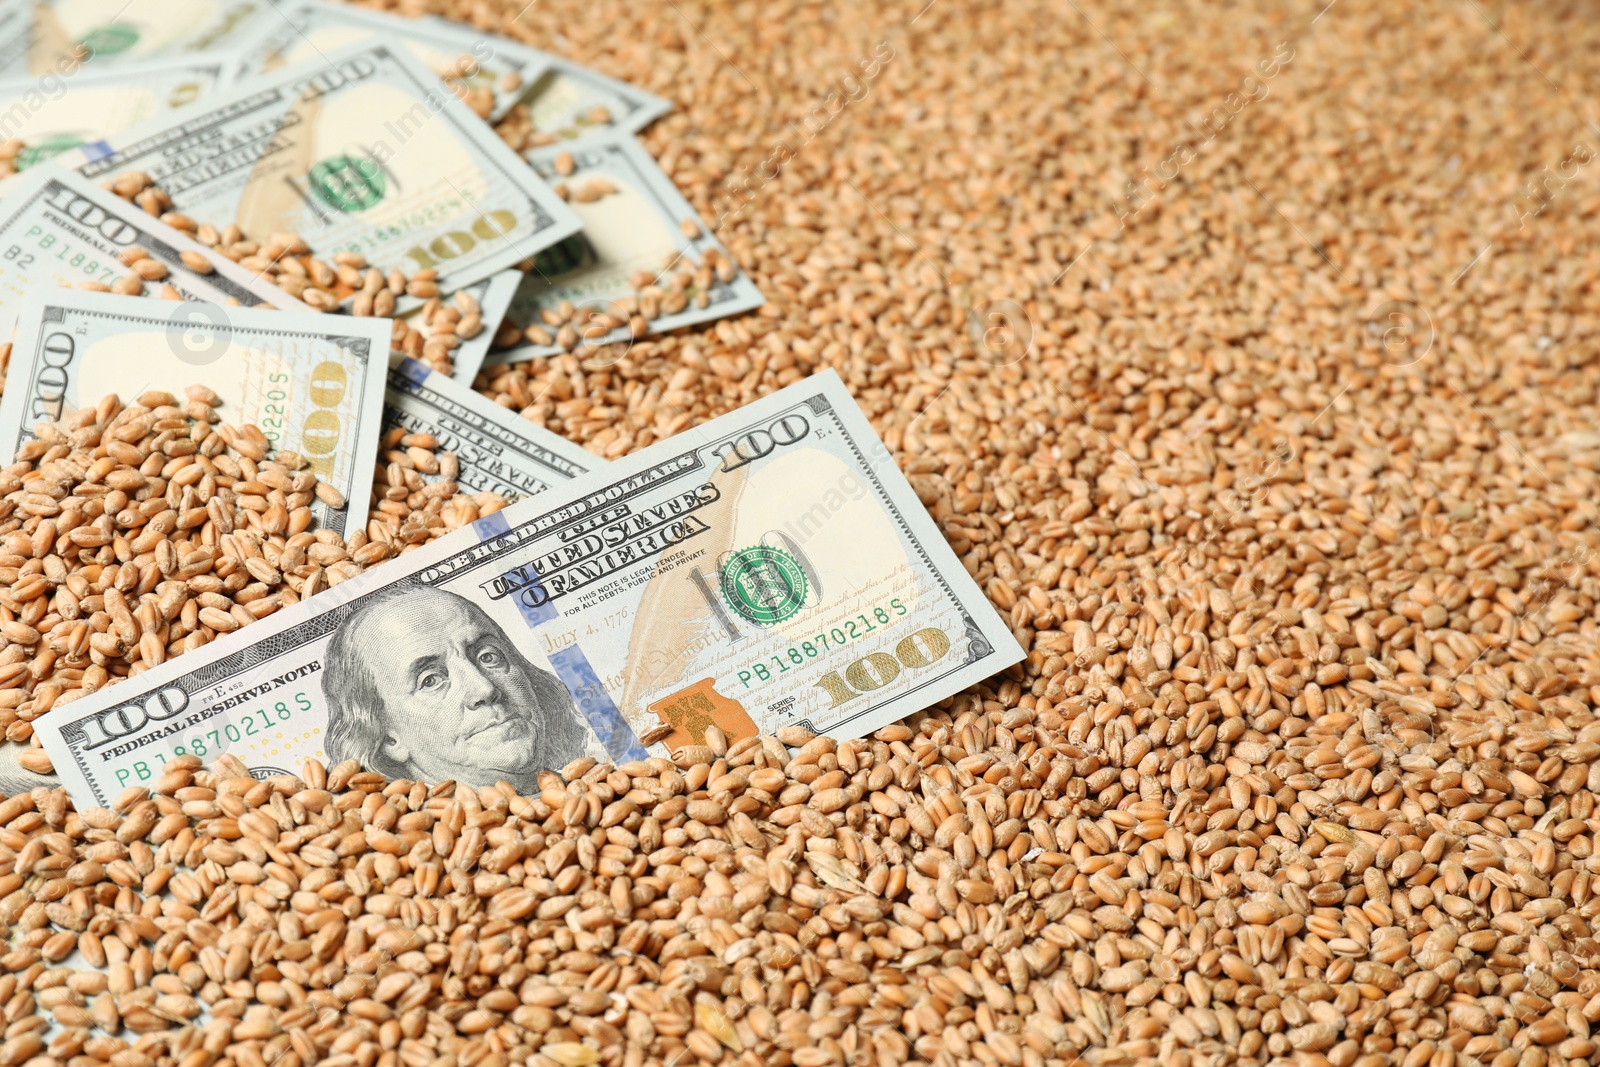 Photo of Dollar banknotes on wheat grains, closeup. Agricultural business